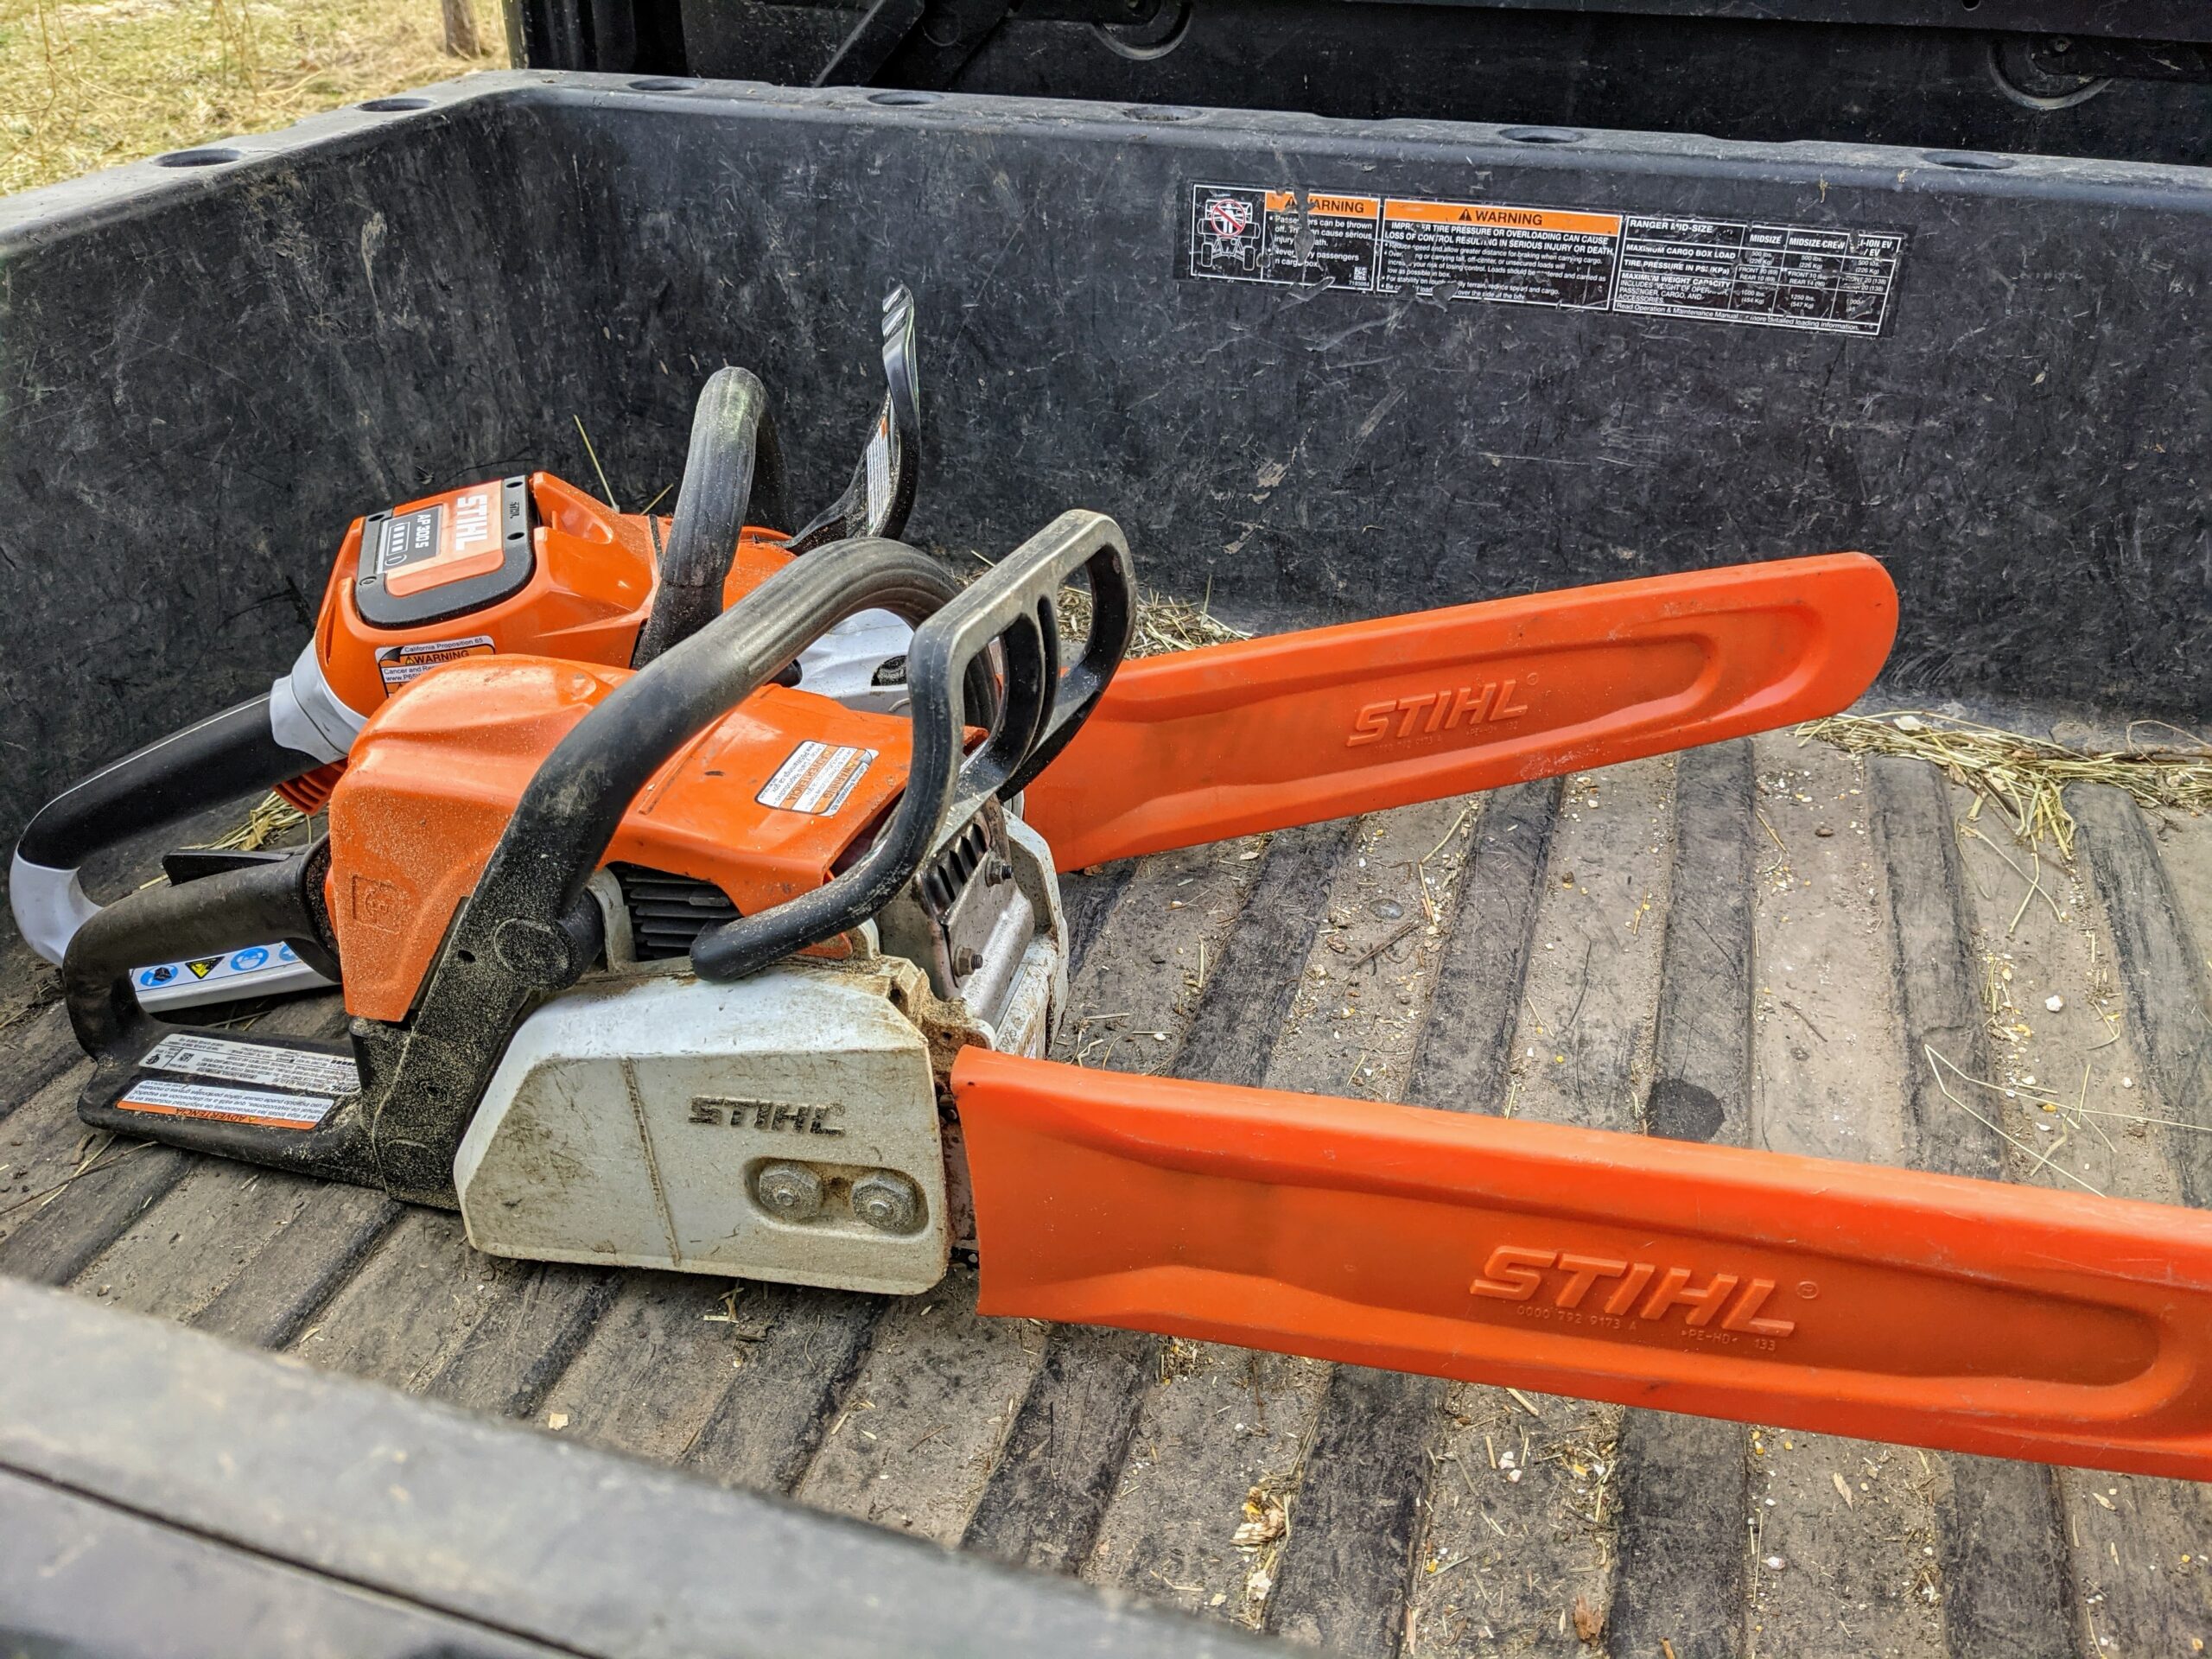 How to Start a Chainsaw, STIHL Chainsaws